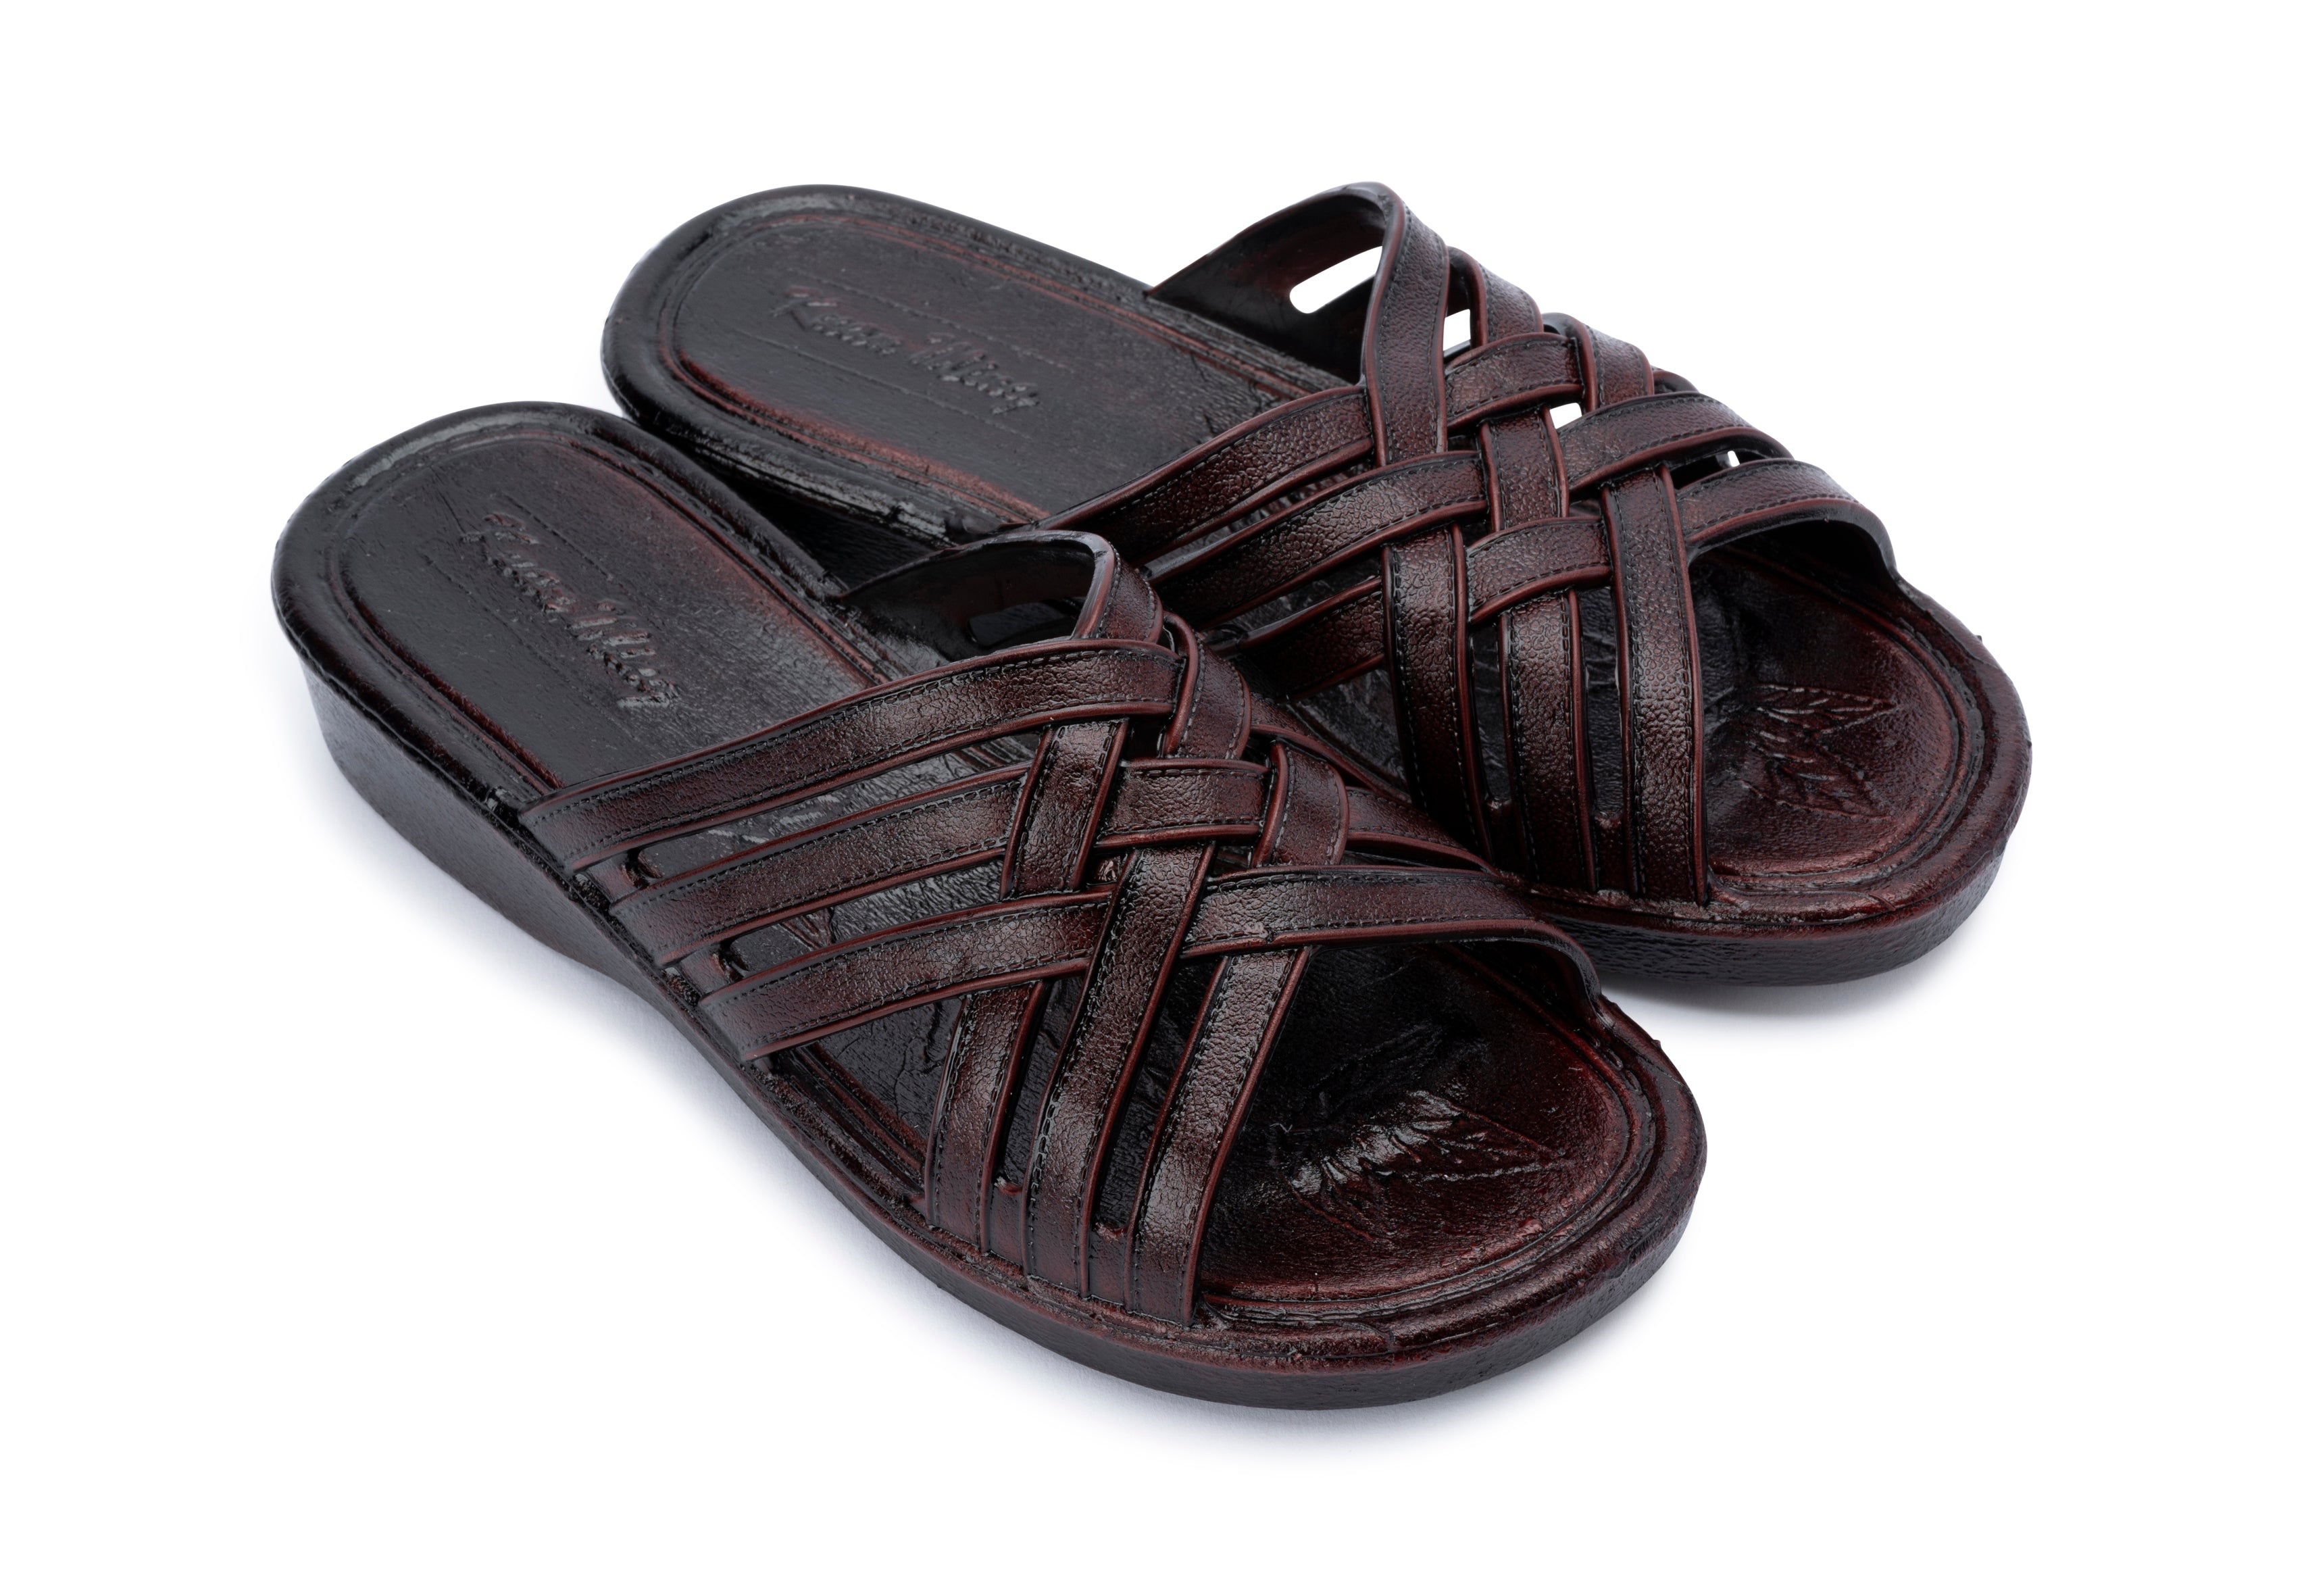 Sandal with Cross Style